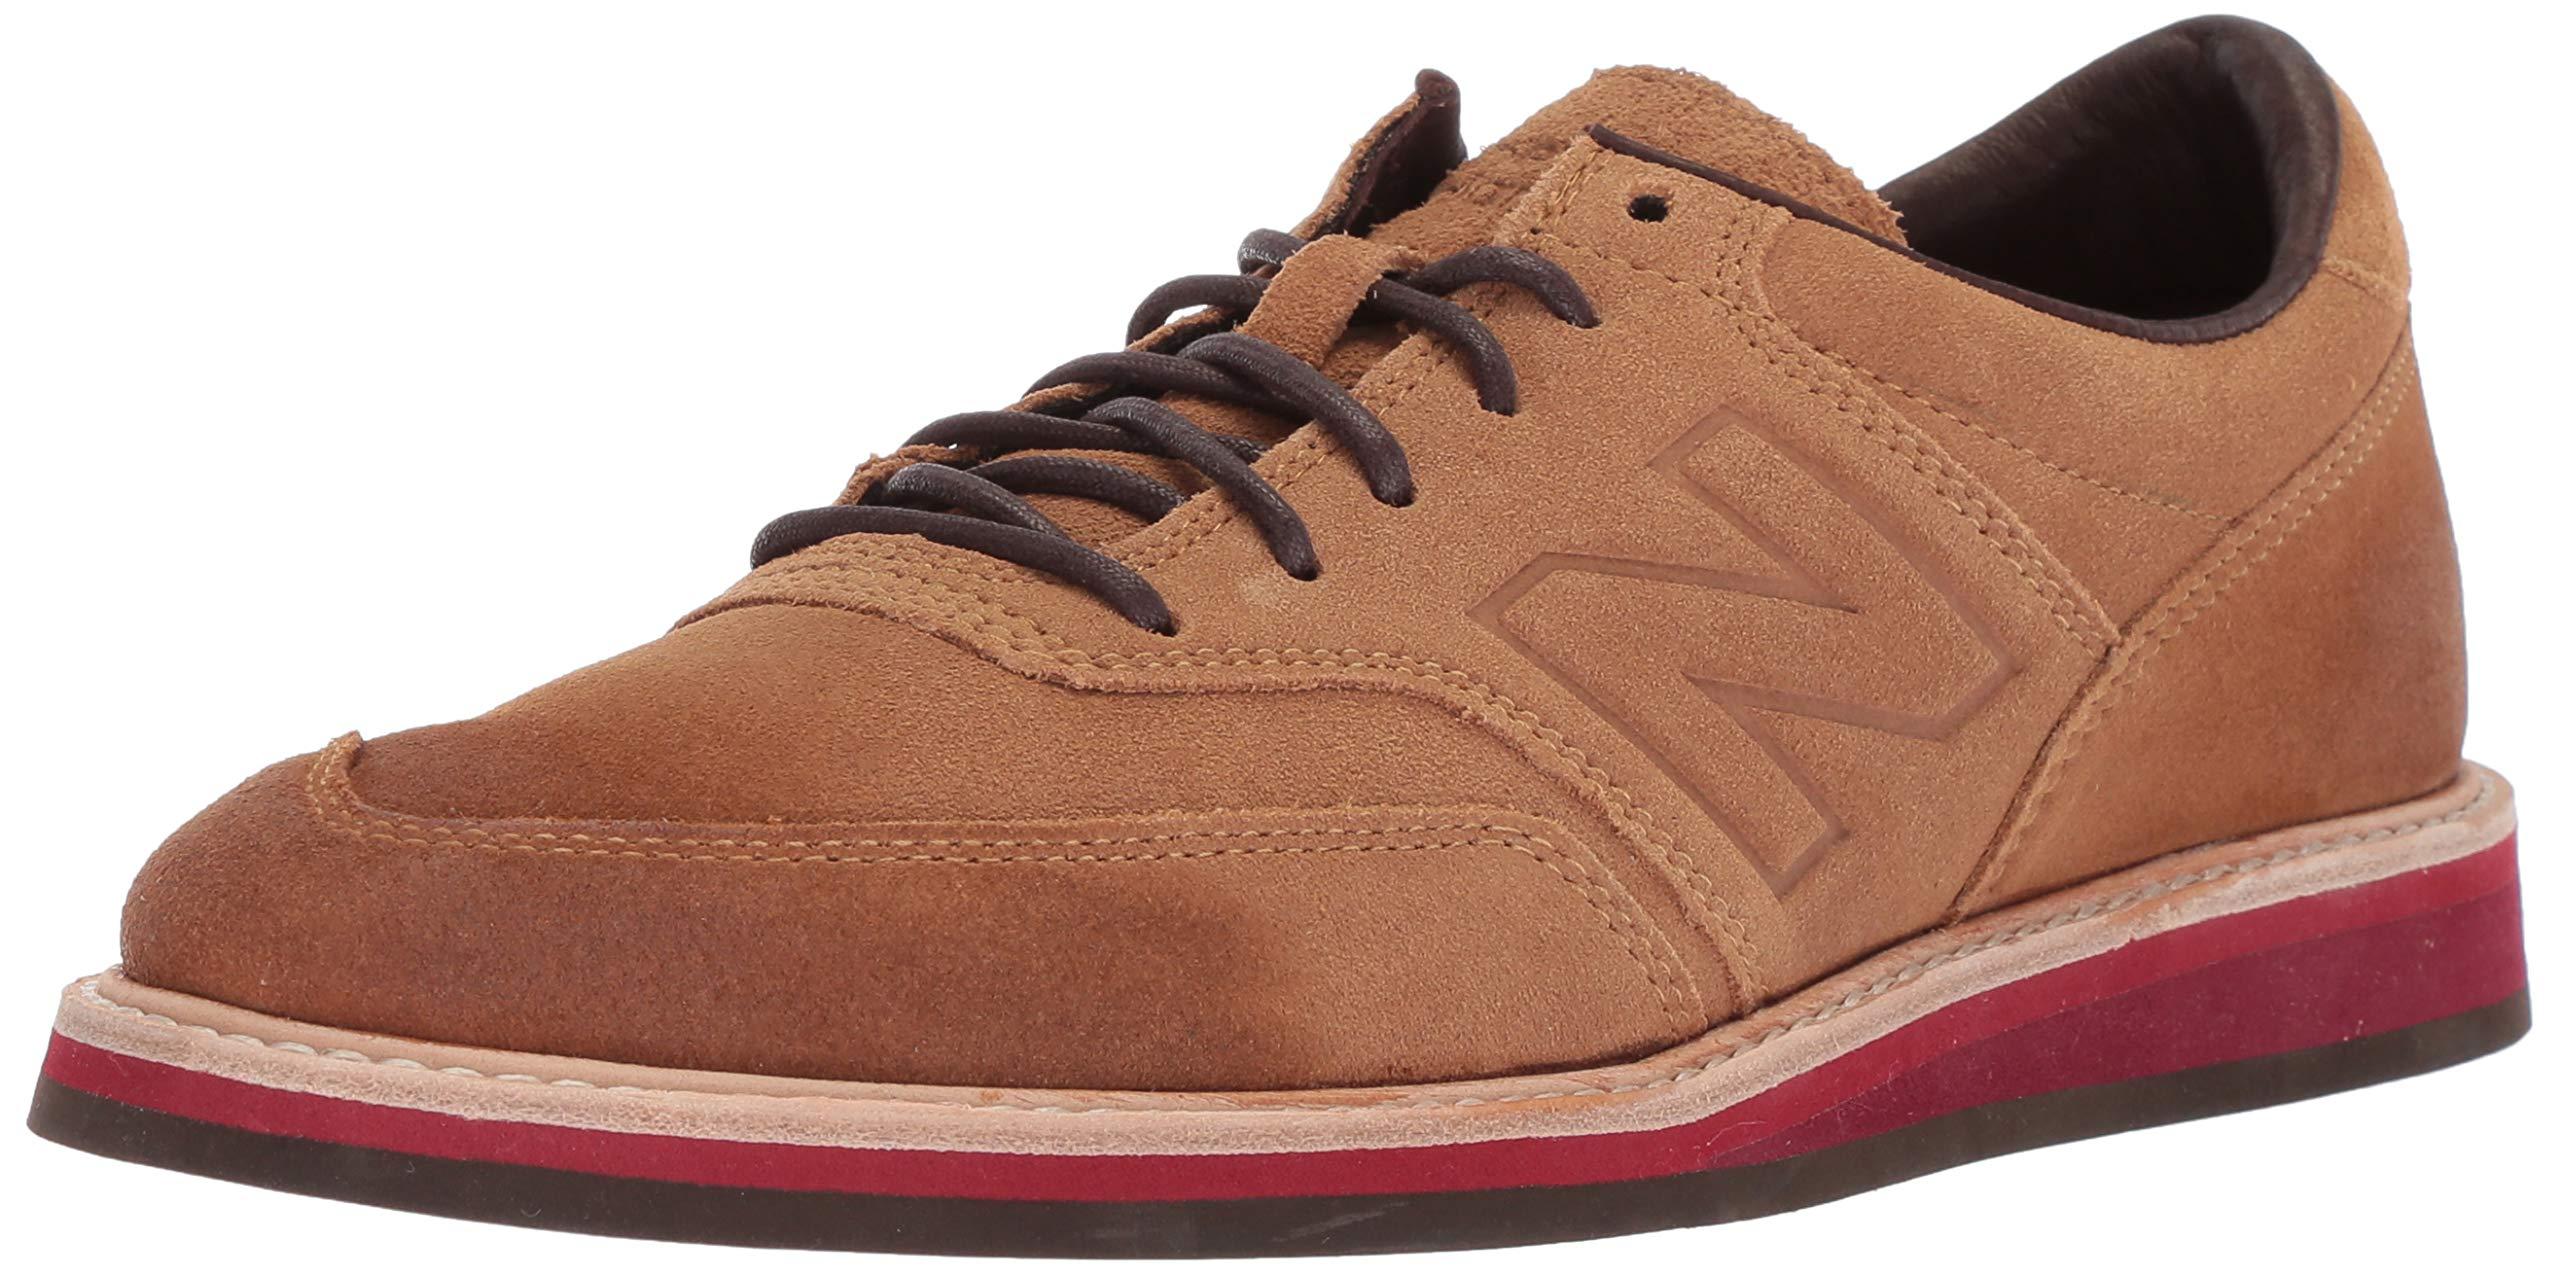 New Balance Leather 1100 V1 Walking Shoe in Brown/Maroon (Brown) for Men -  Save 49% | Lyst